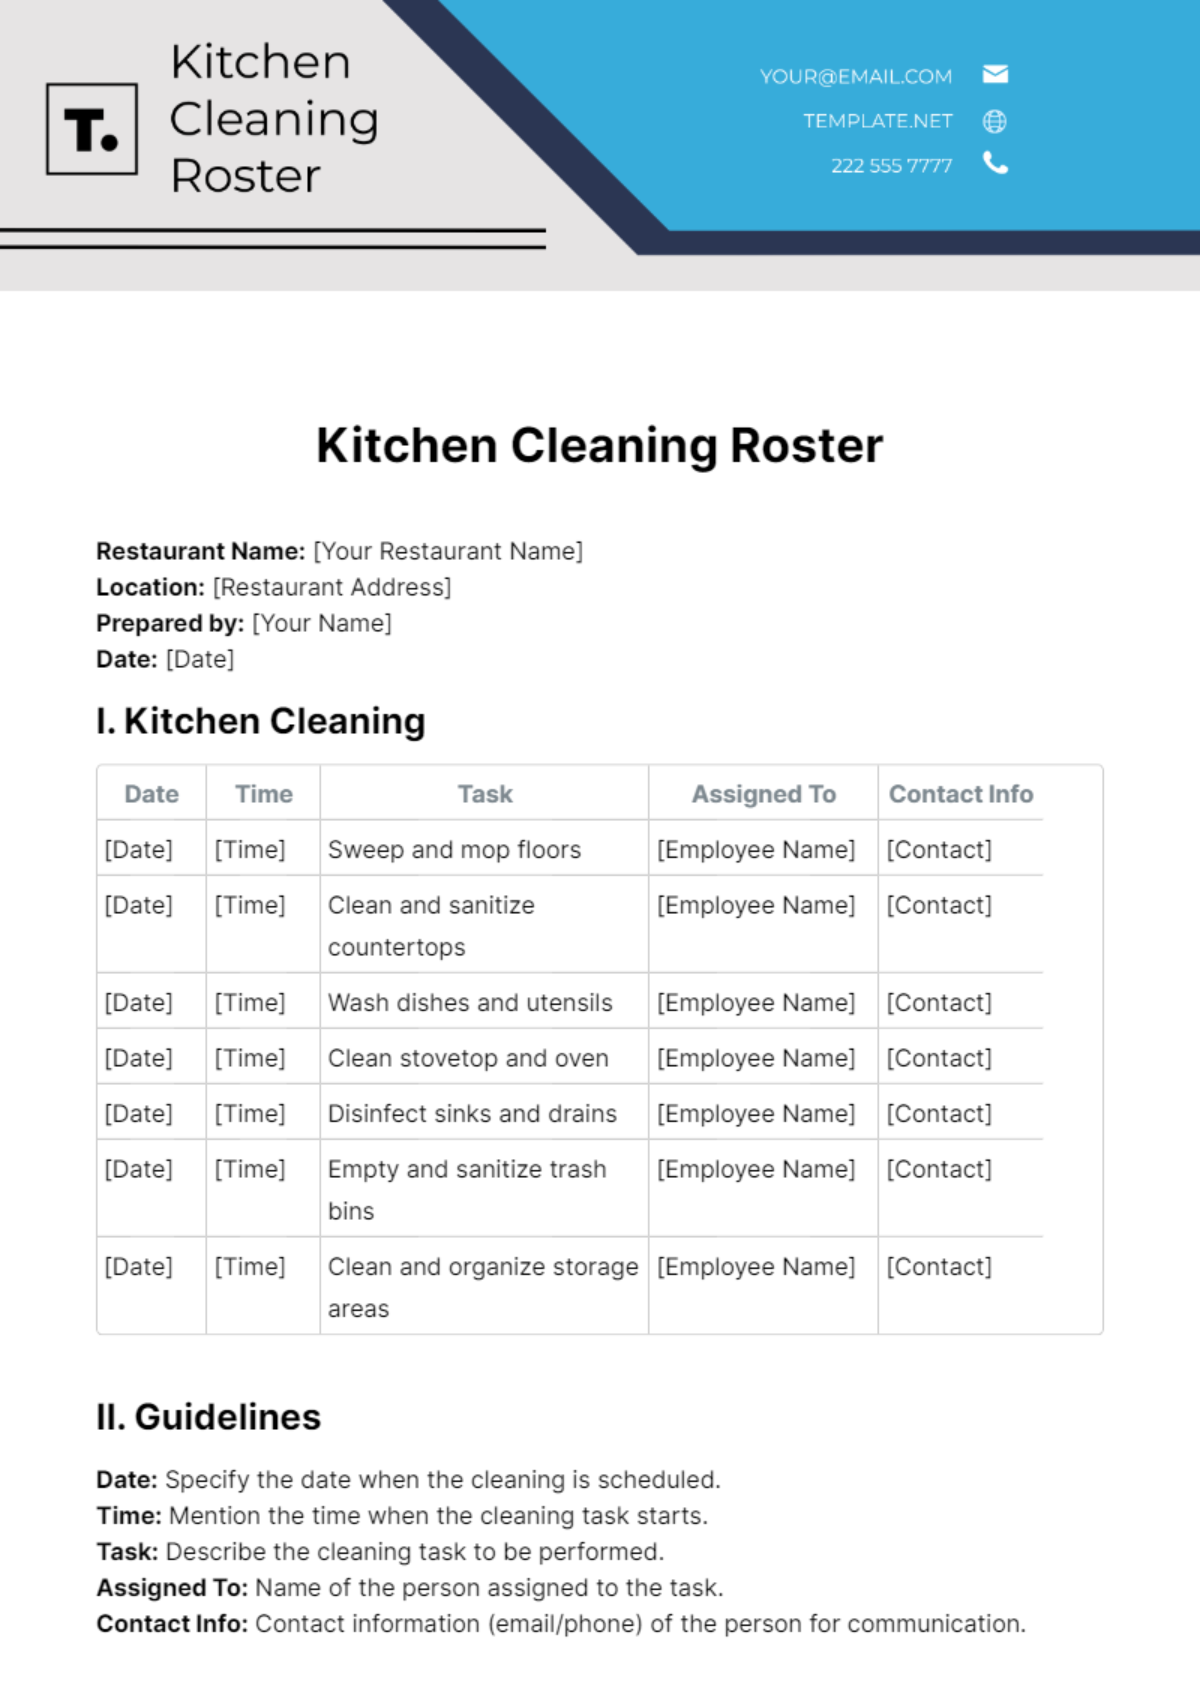 Kitchen Cleaning Roster Template